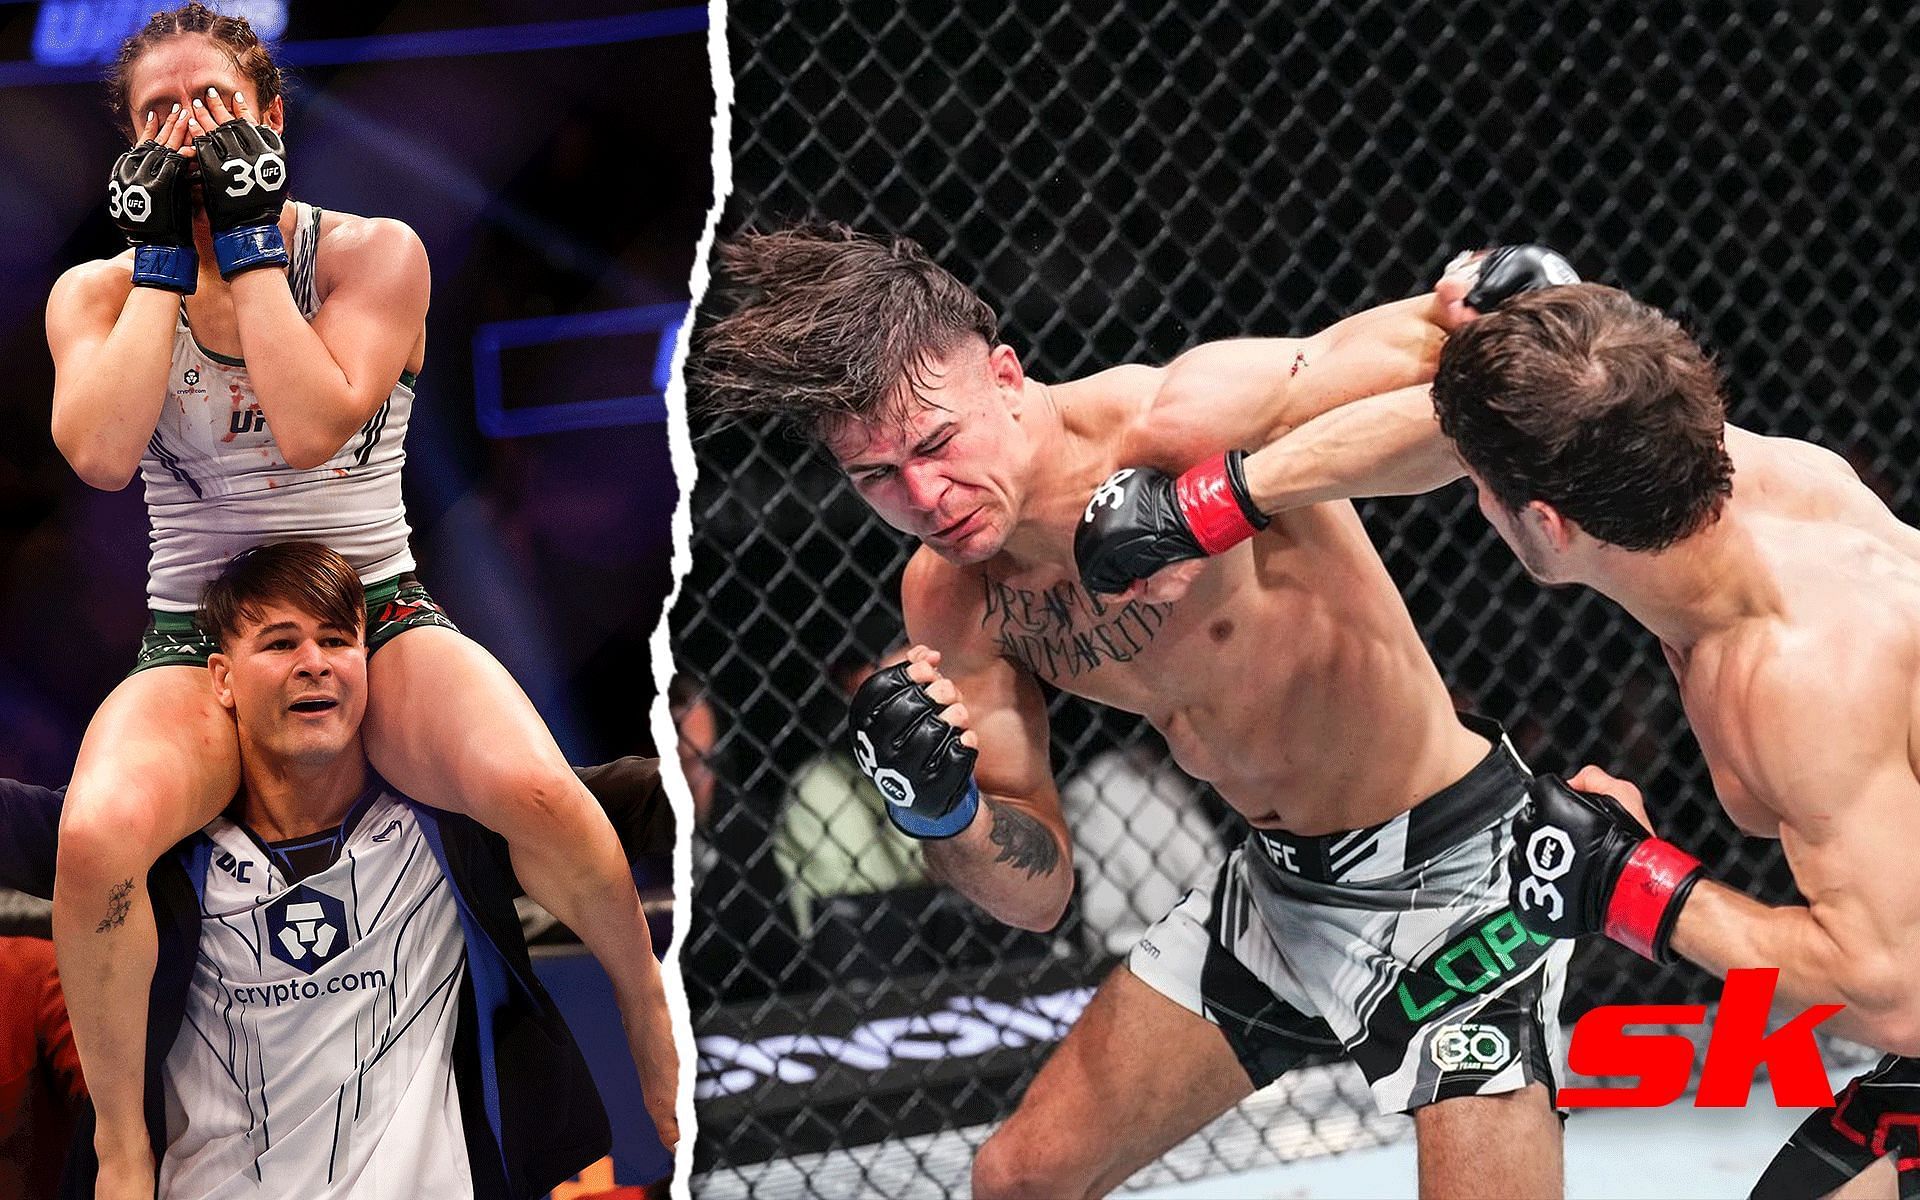 Alexa Grasso and Diego Lopes (left) and Lopes vs. Evloev. [Images courtesy: left image from Getty Images and right image from UFC]